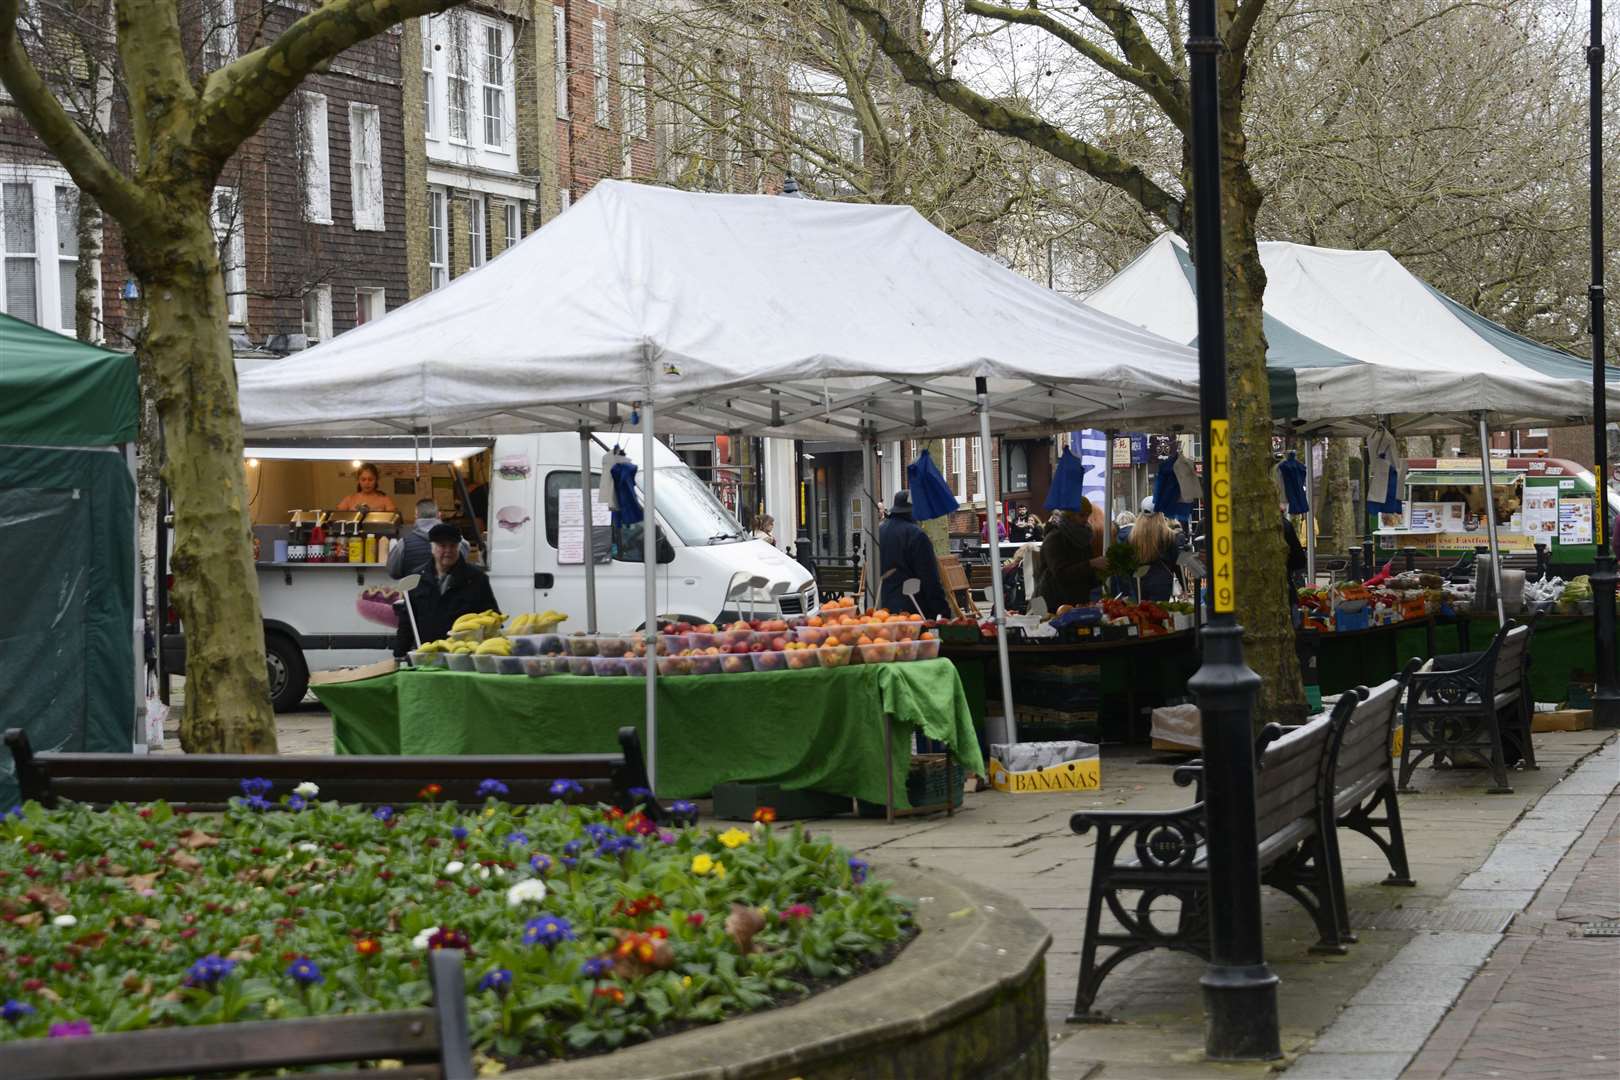 The market is based in the Lower High Street. Picture: Paul Amos